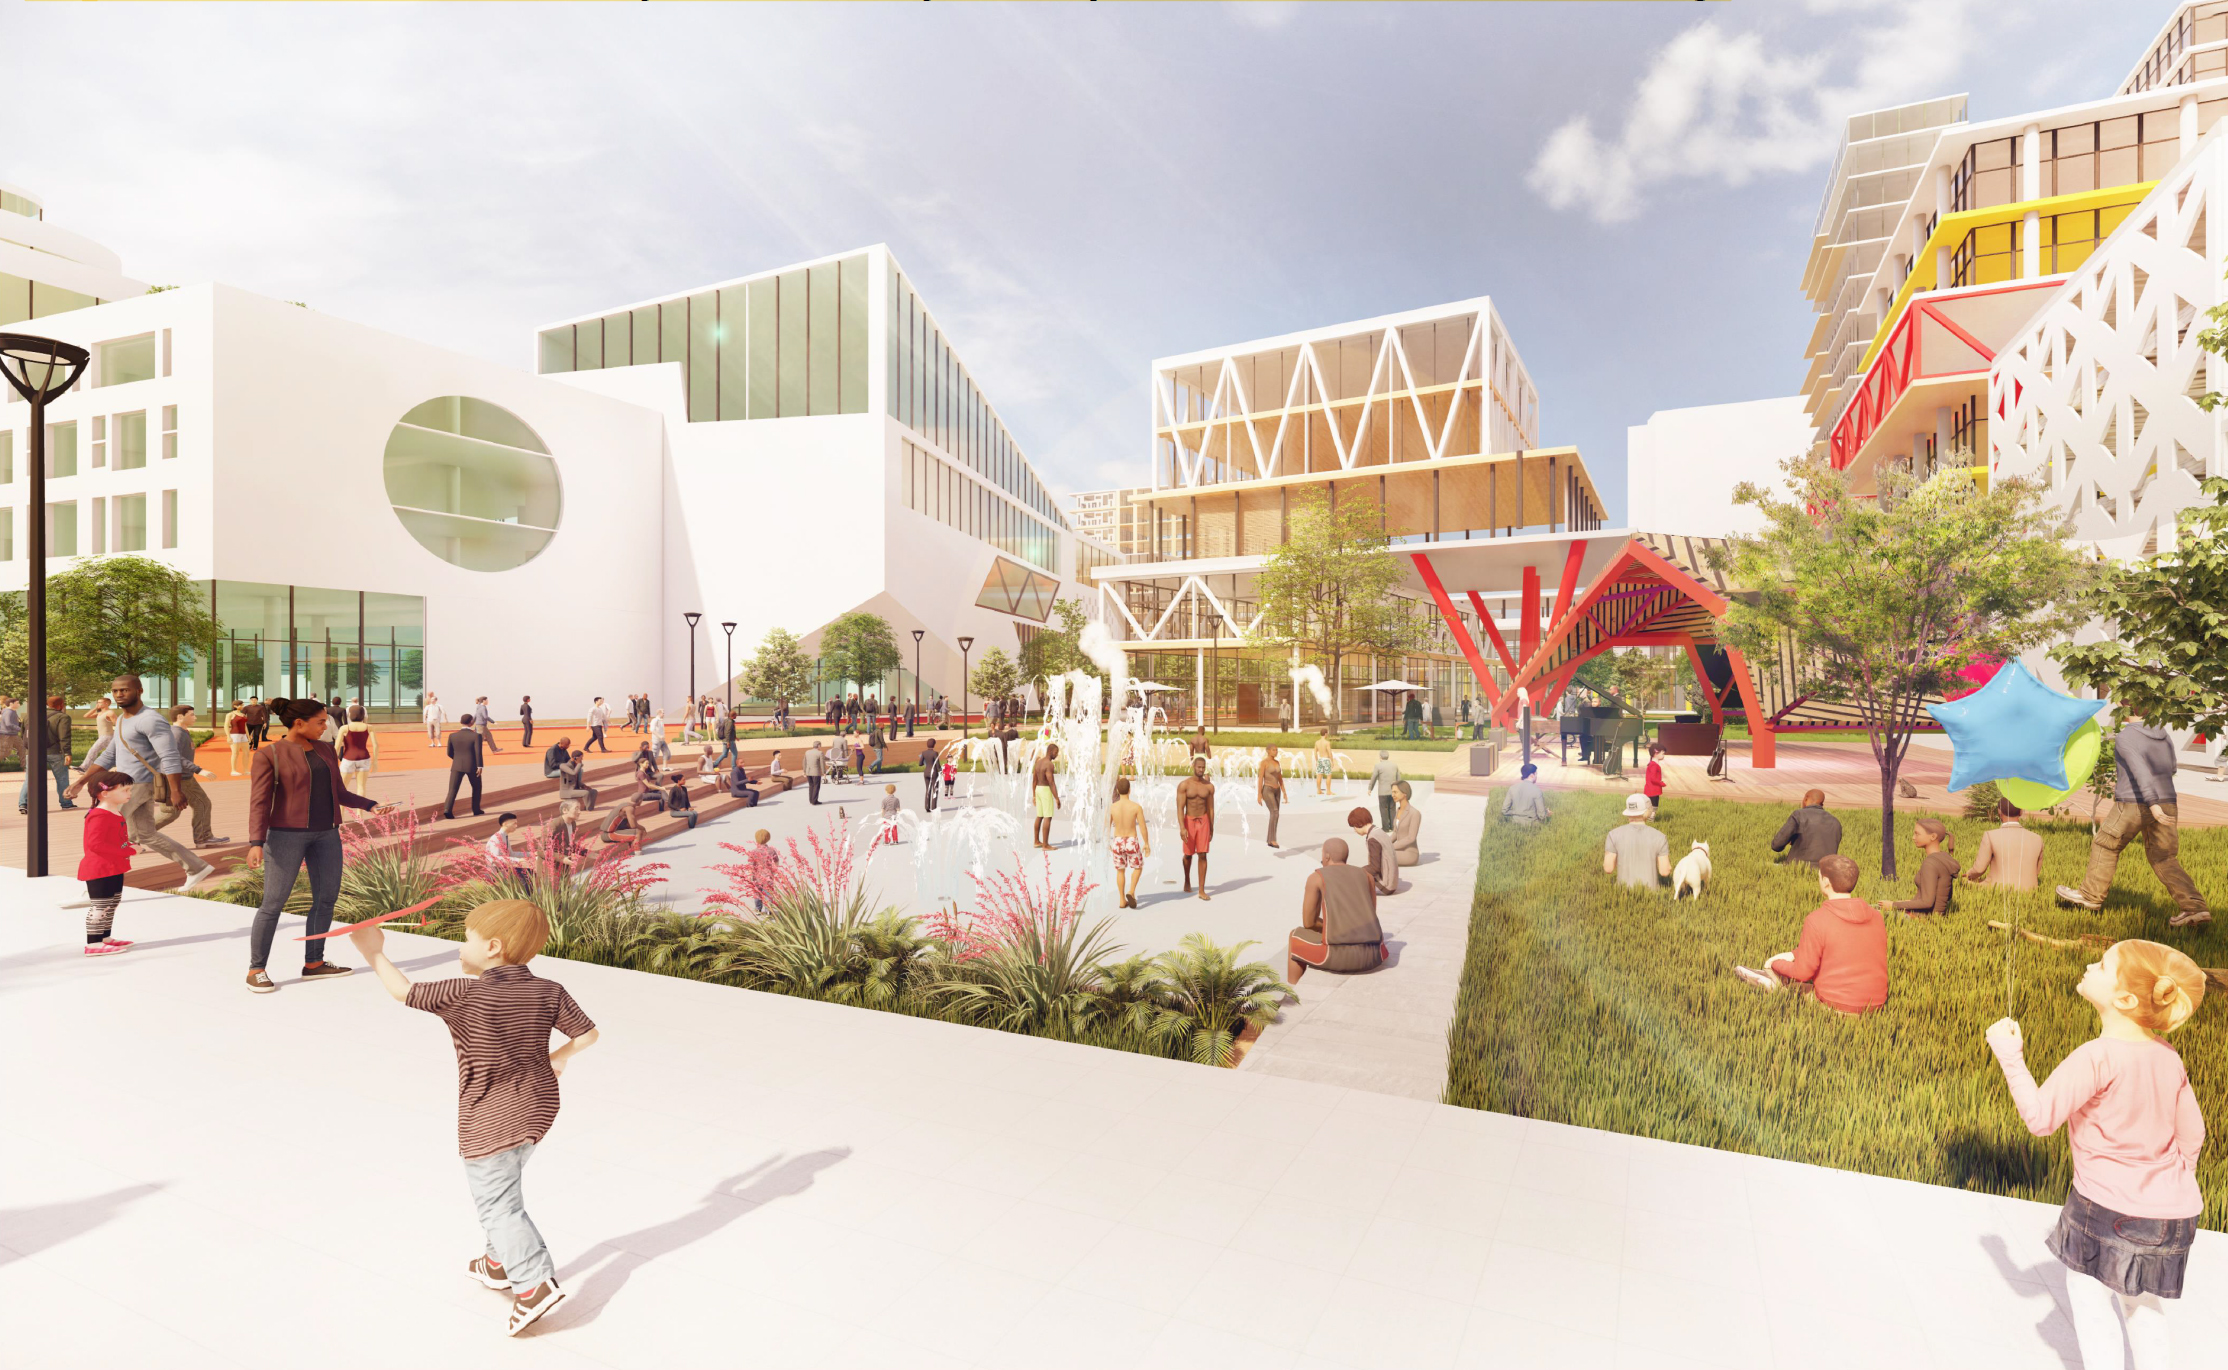 Winning proposal for Kansas City, designed by the Fusion team for ULI Hines Competition.